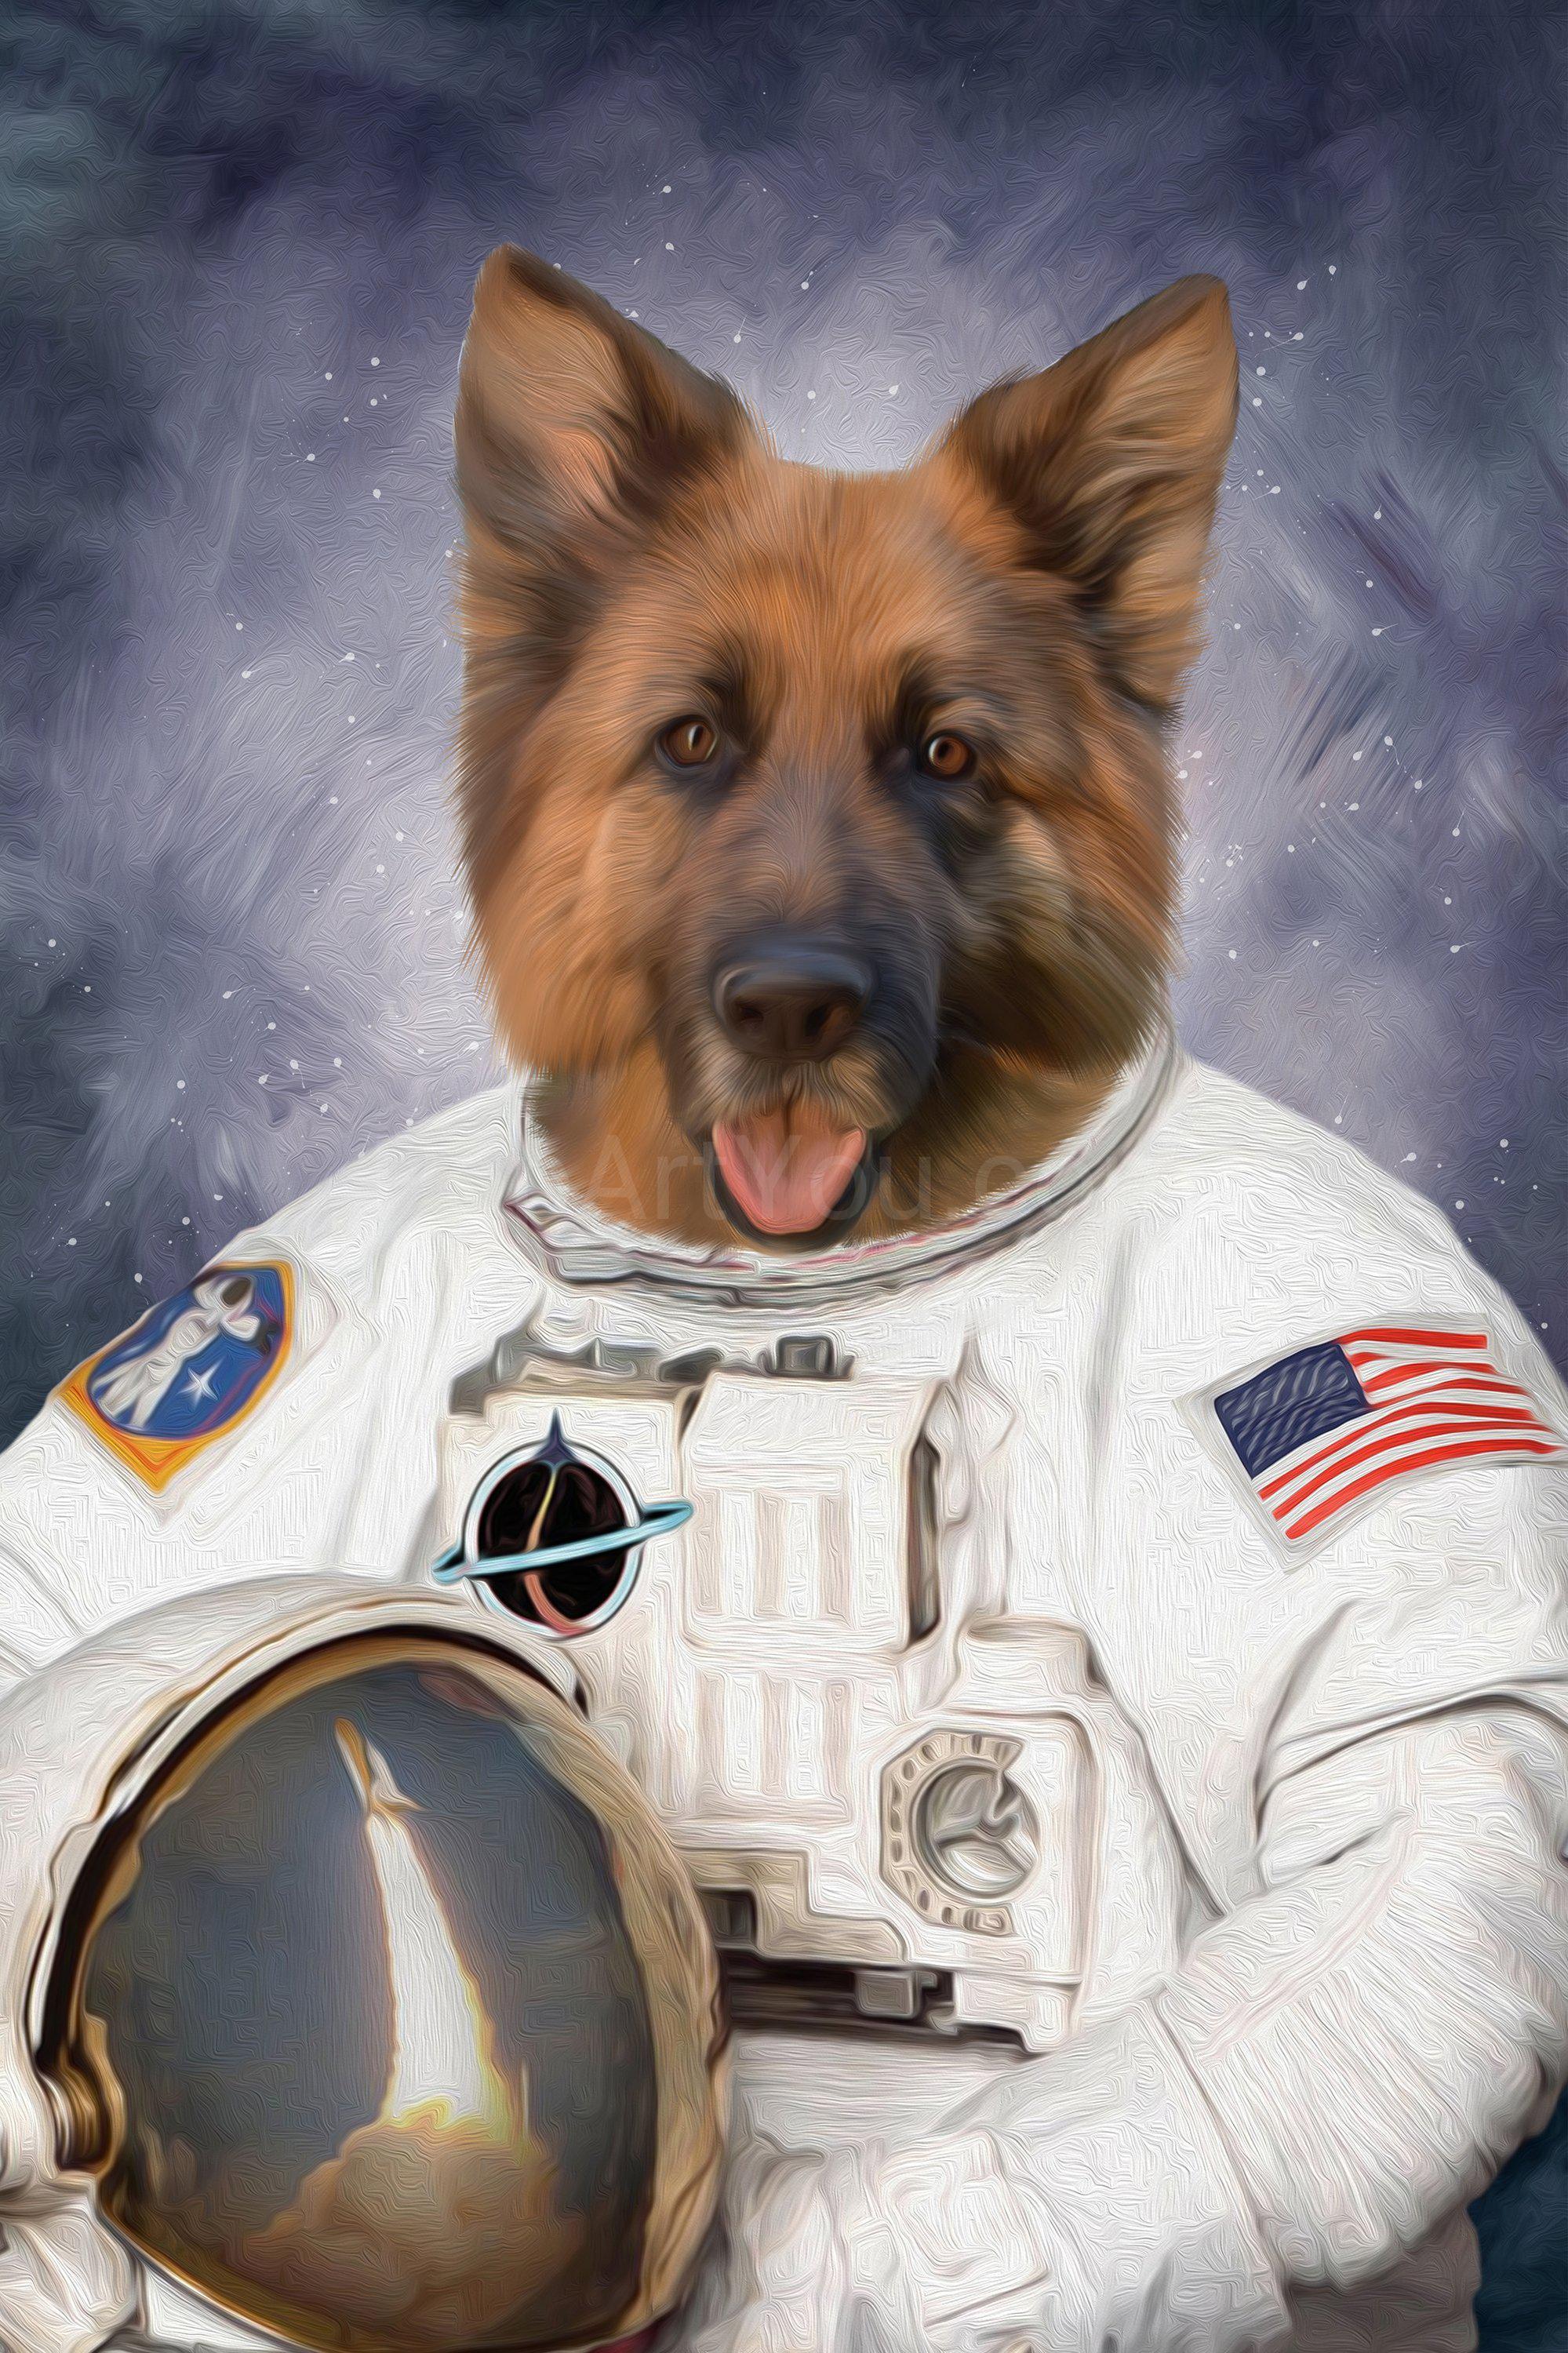 The portrait shows a dog with a human body dressed in an American astronaut costume